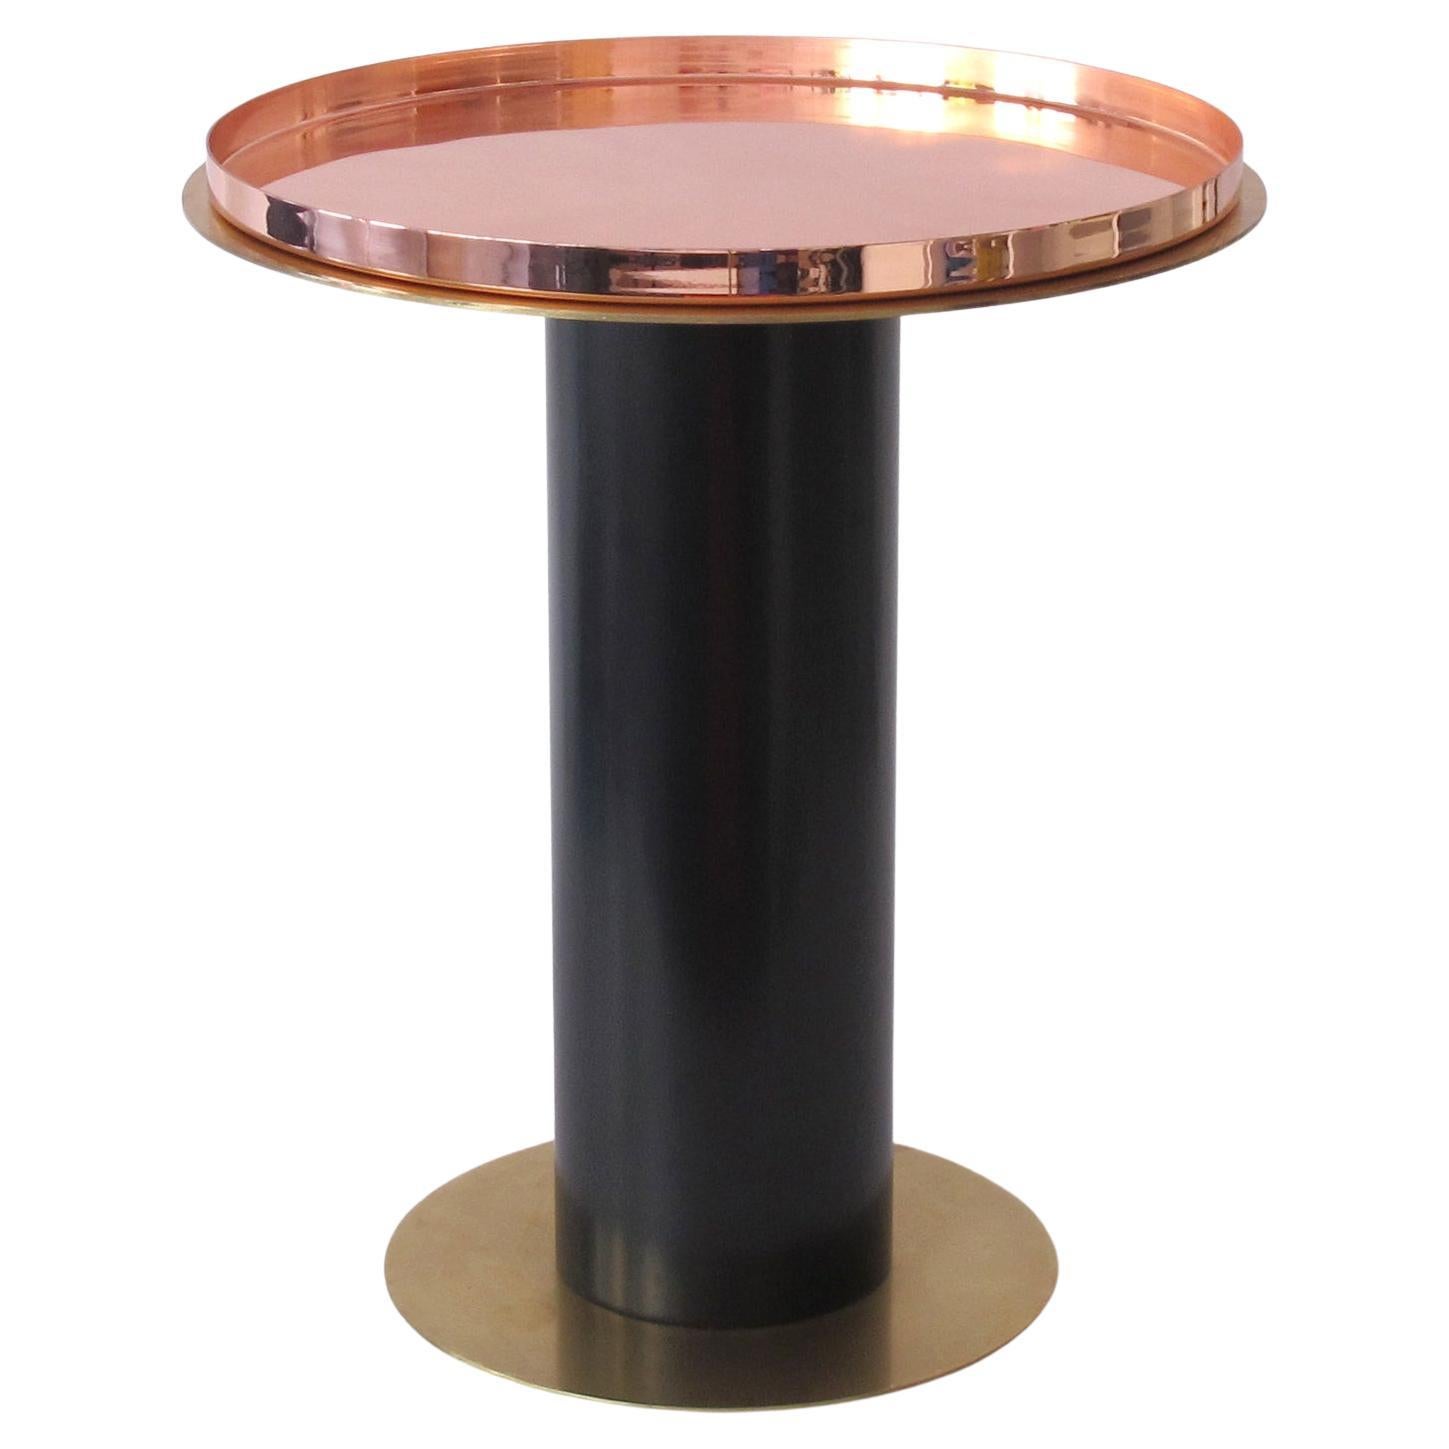 'Reel' Minimalist Brass Side Table with Copper Tray For Sale